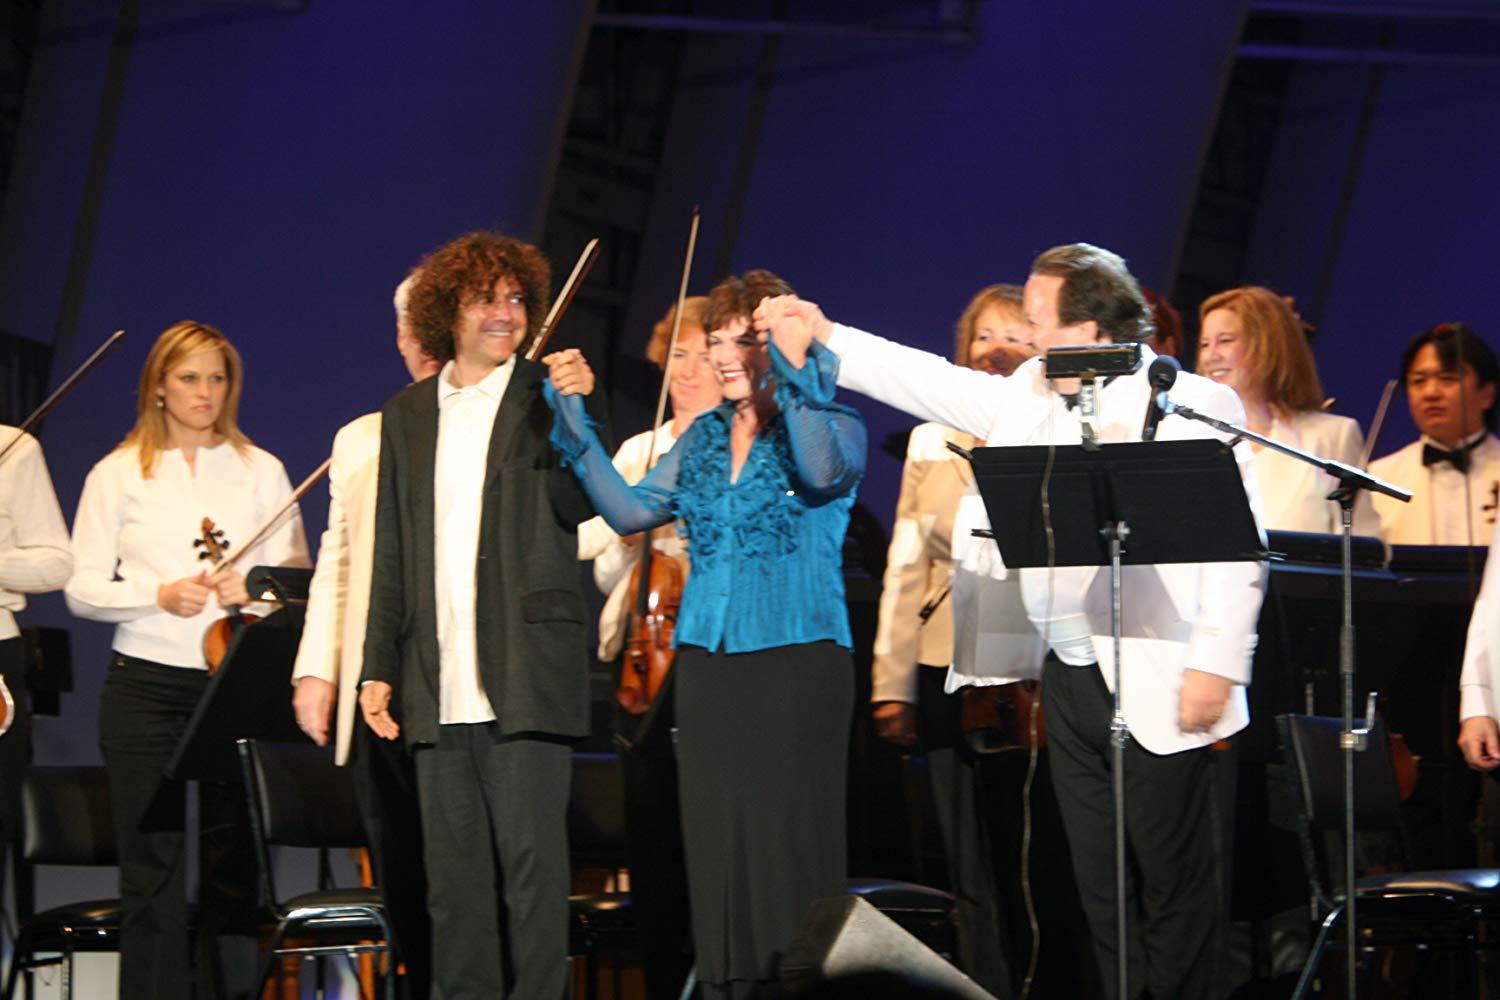 Curtain call: Anthony Marinelli (composer), Julia Sweeney (narrator) and Lucas Richman (conductor), Los Angeles Philharmonic performance of “In the Family Way”, Hollywood Bowl, Hollywood, CA, 2006